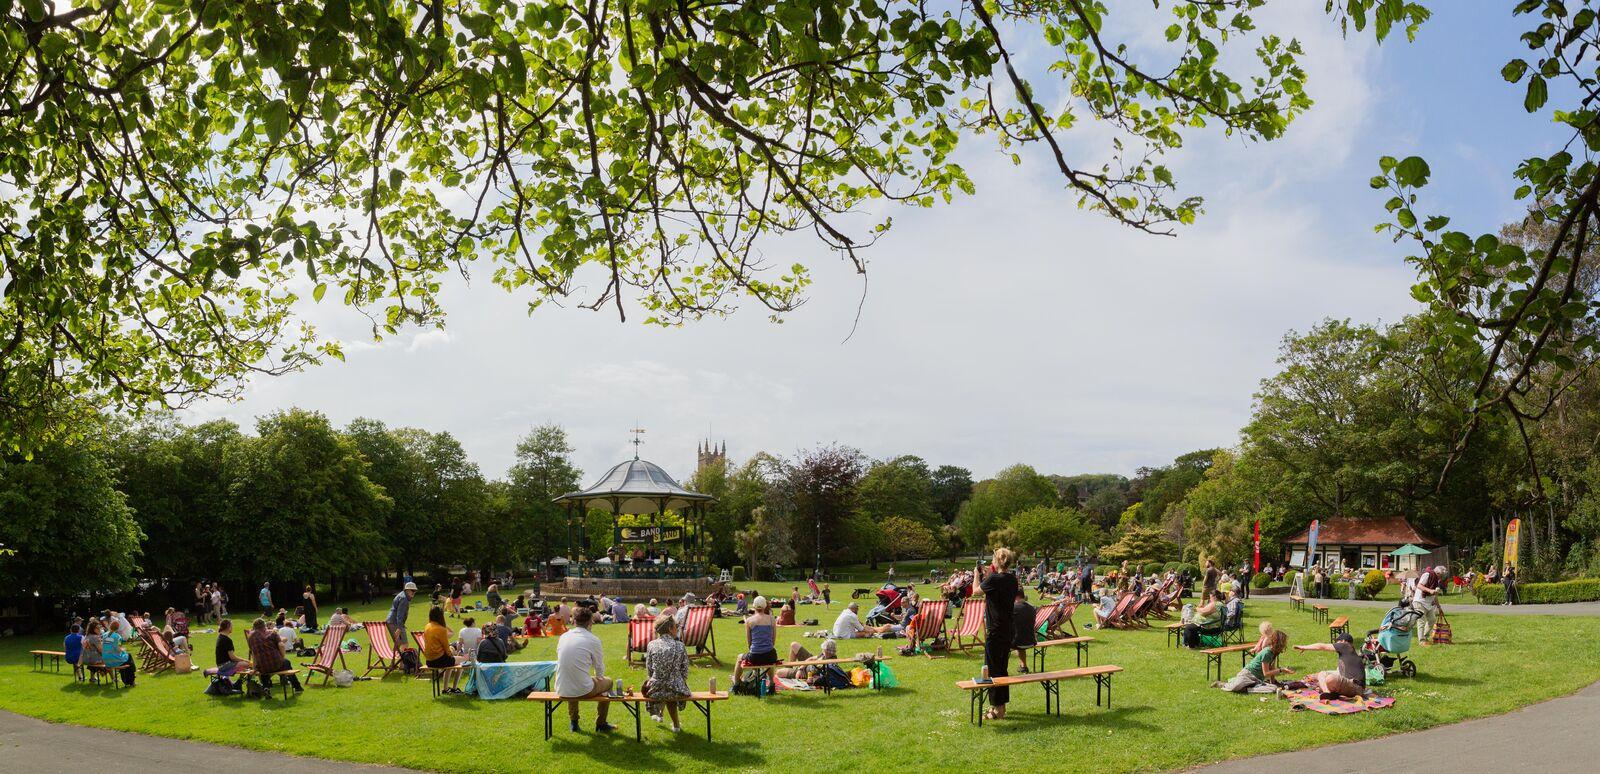 A wide angle shot of Grove Park, a vast green space dotted with people with a Victorian bandstand visible to the left and trees hanging overhead. Image by Paul Blakemore.